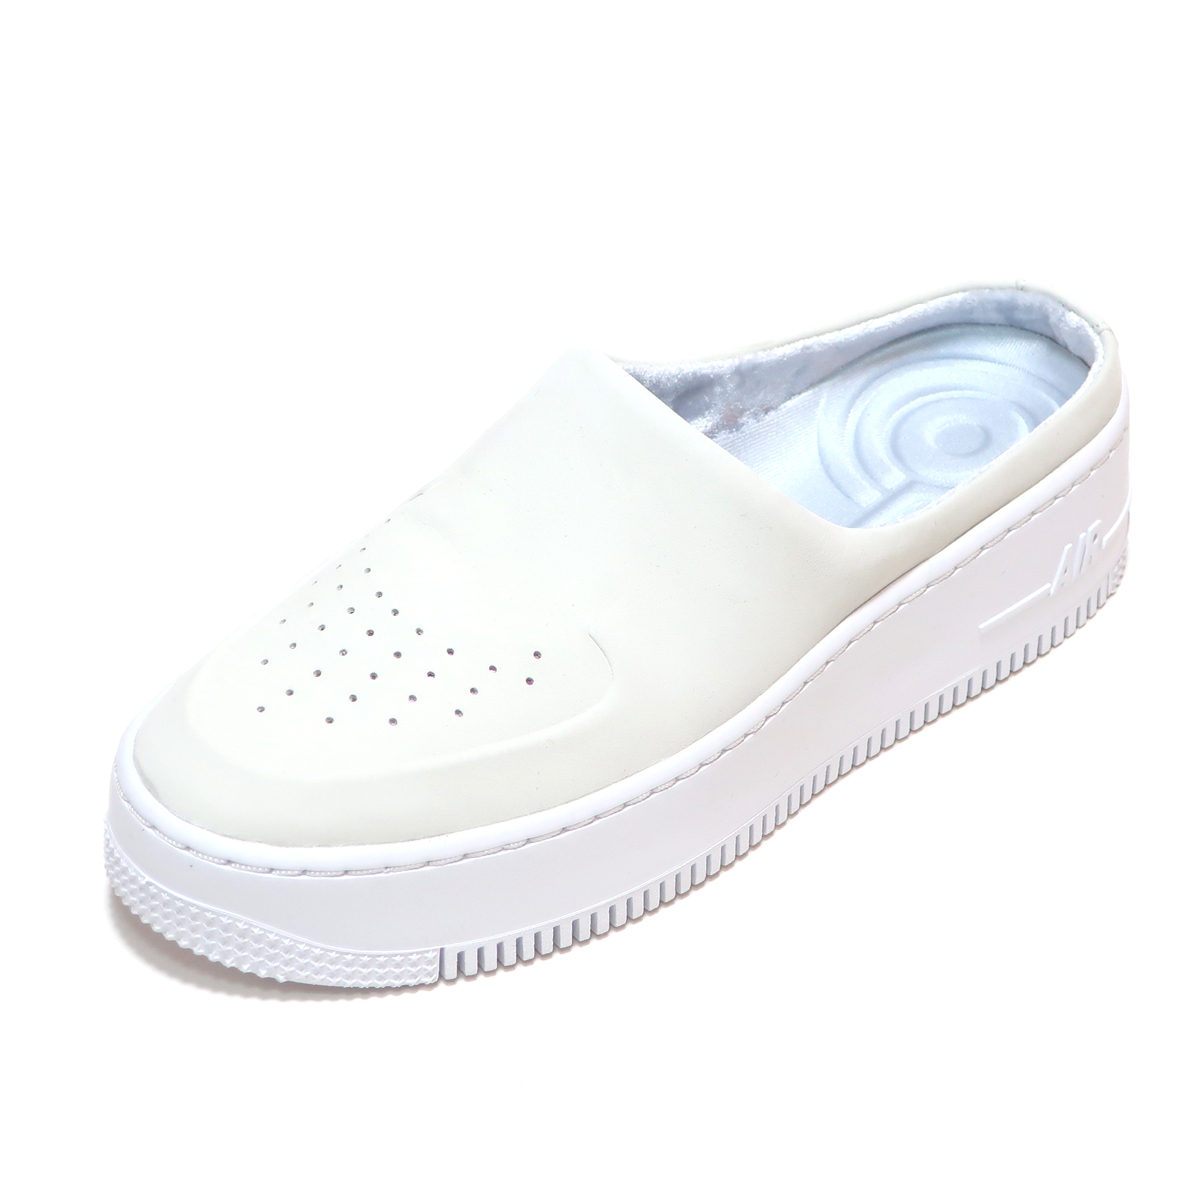 NIKE WMNS AF1 LOVER XX WMNS 24.5cm OFF WHITE/LIGHT SILVER AIR FORCE 1 ( ナイキ ウィメンズ エアフォース1 ラヴァ― オフホワイト )_画像5